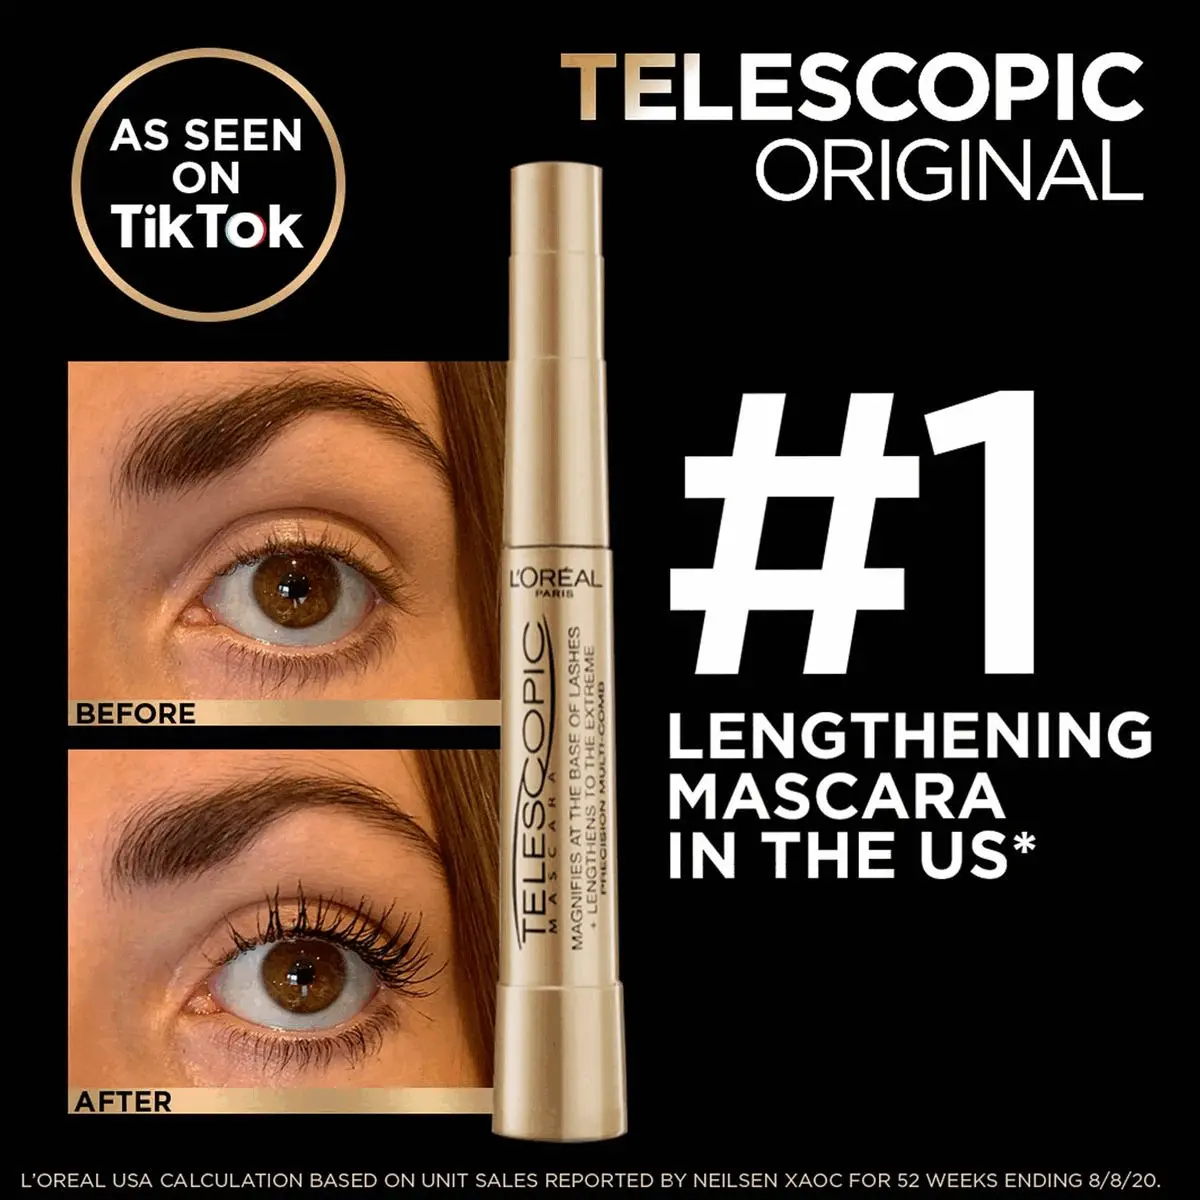 Image 1, as seen on tikok, telescopic original. Number 1 lengthening mascara in the US before and after. Image 2, before and after. Image 3, flexiable slim wand, precise lash by lash separation, clump free results. Image 4, step one = telescopic mascara, step 2 = perfect slim, step 3 = skinny definer.